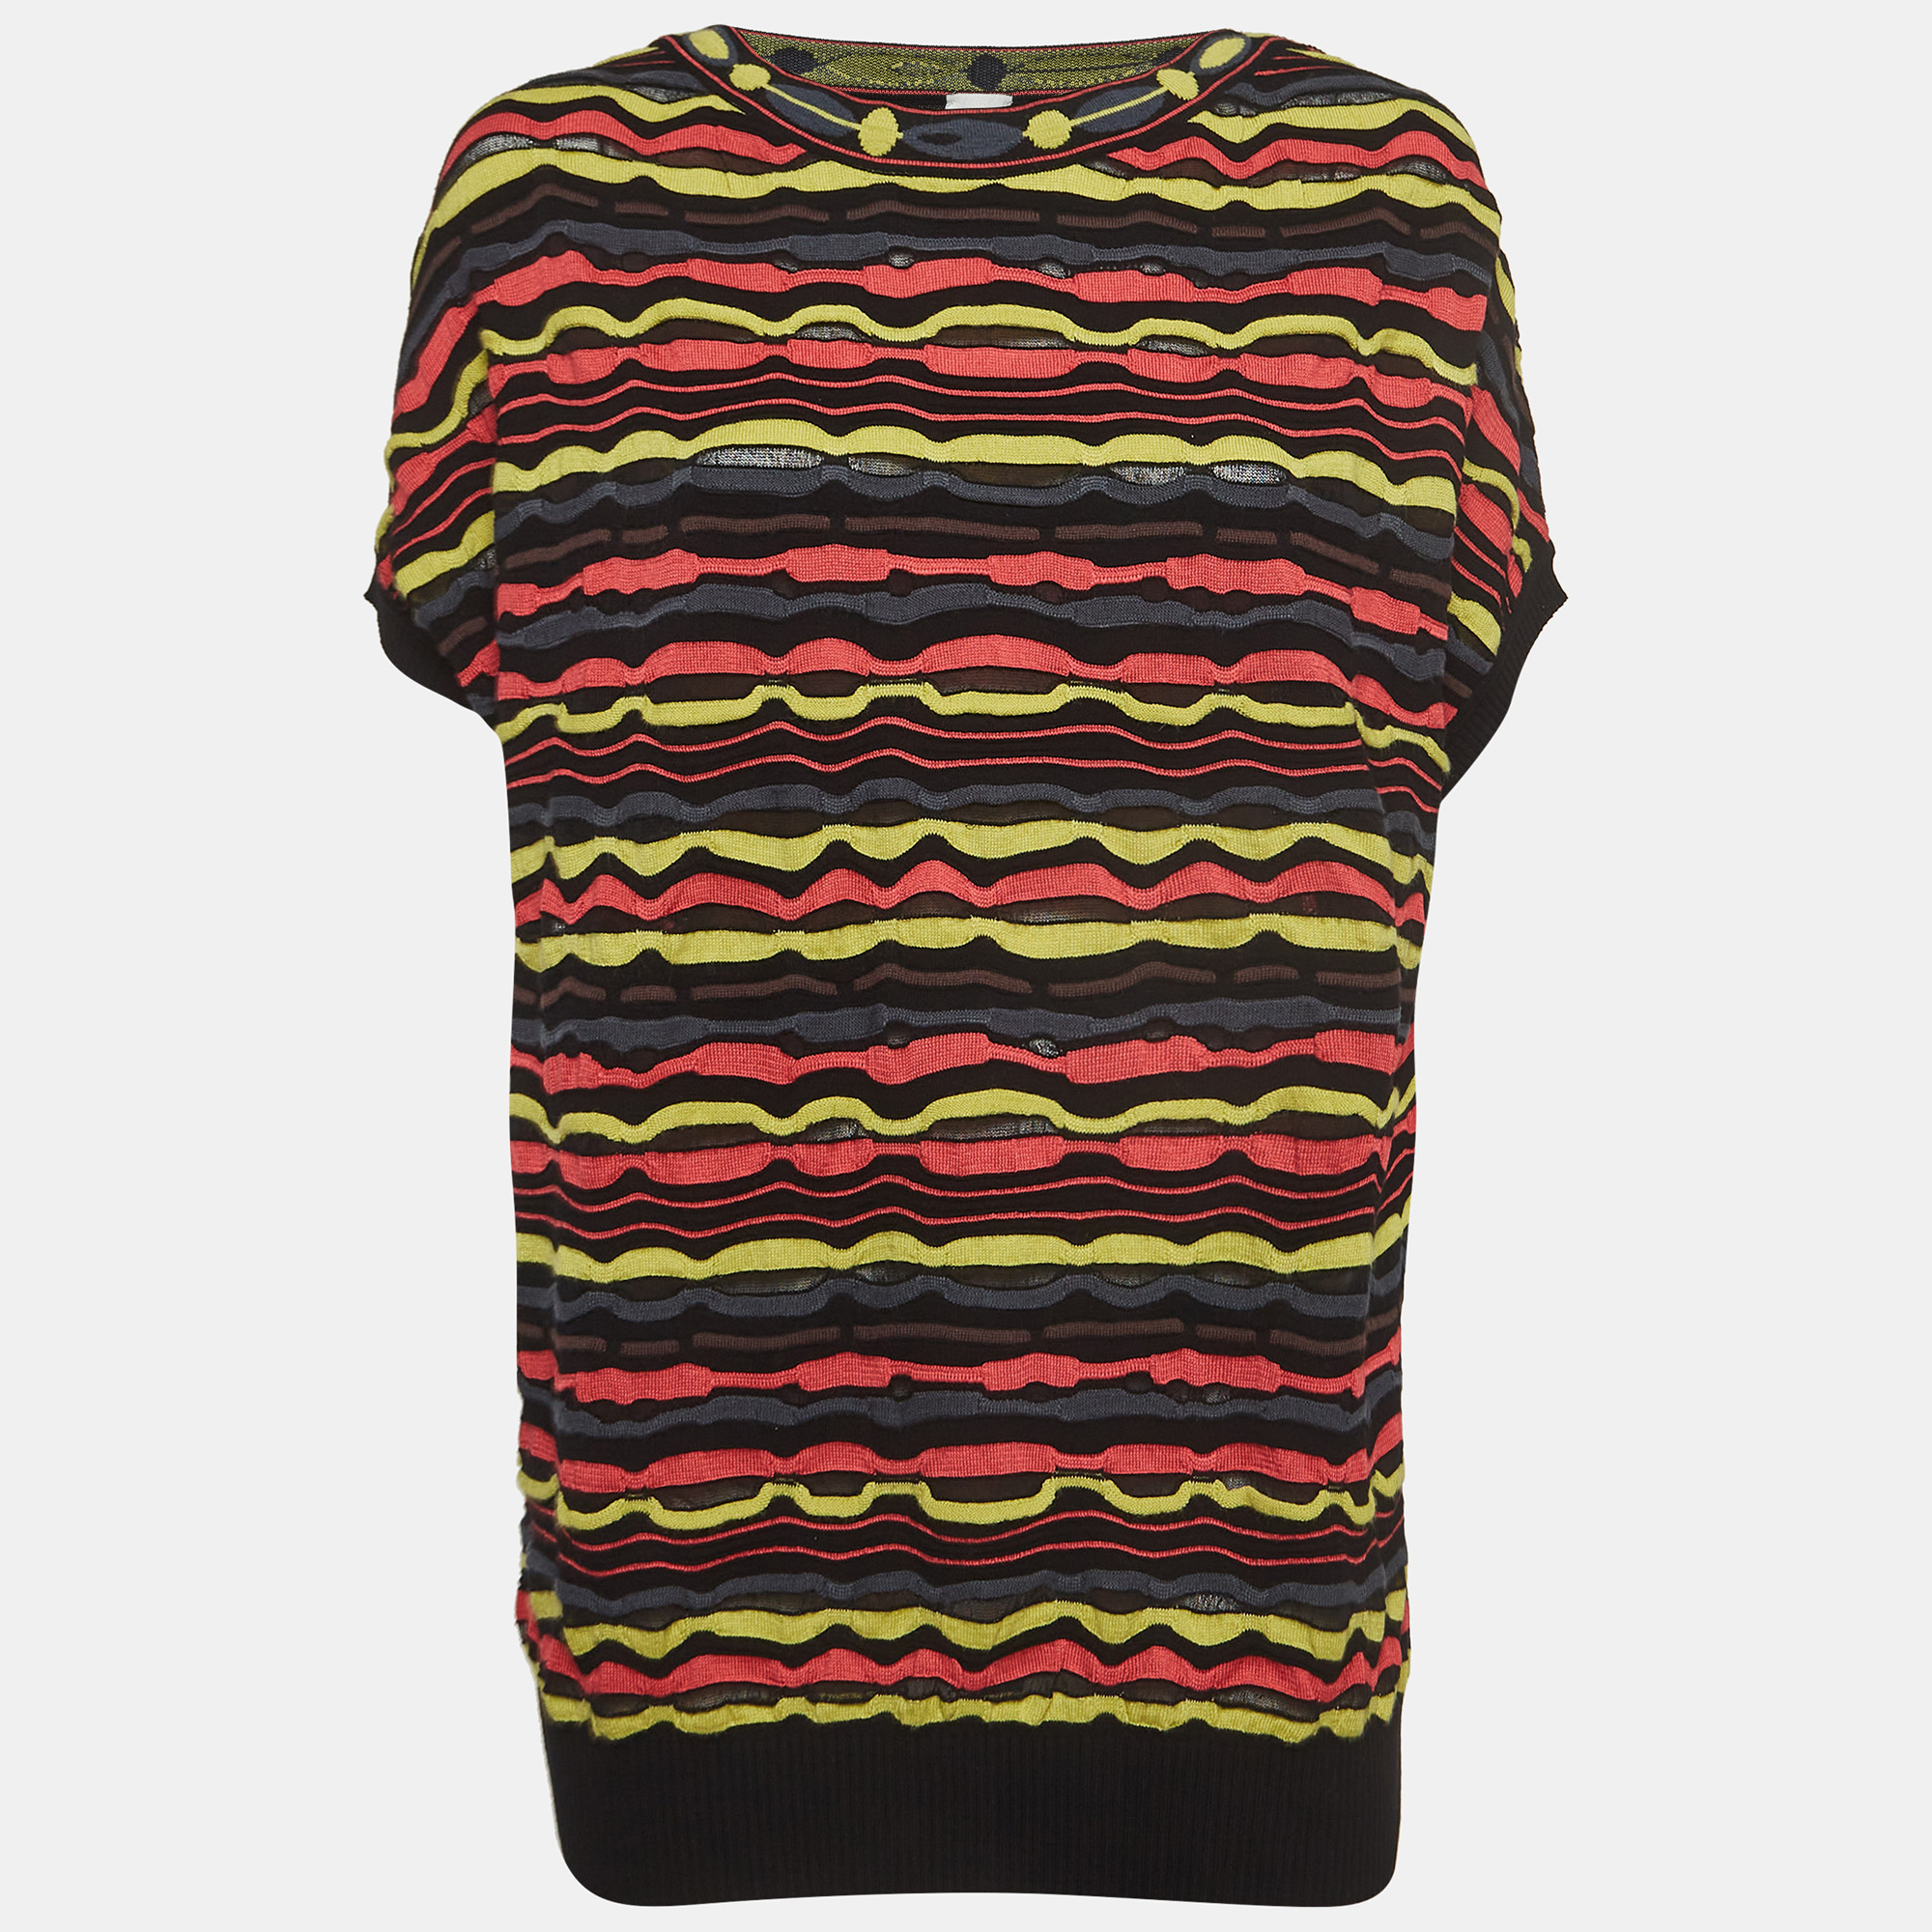 M missoni multicolor patterned knit short sleeve sweater top l